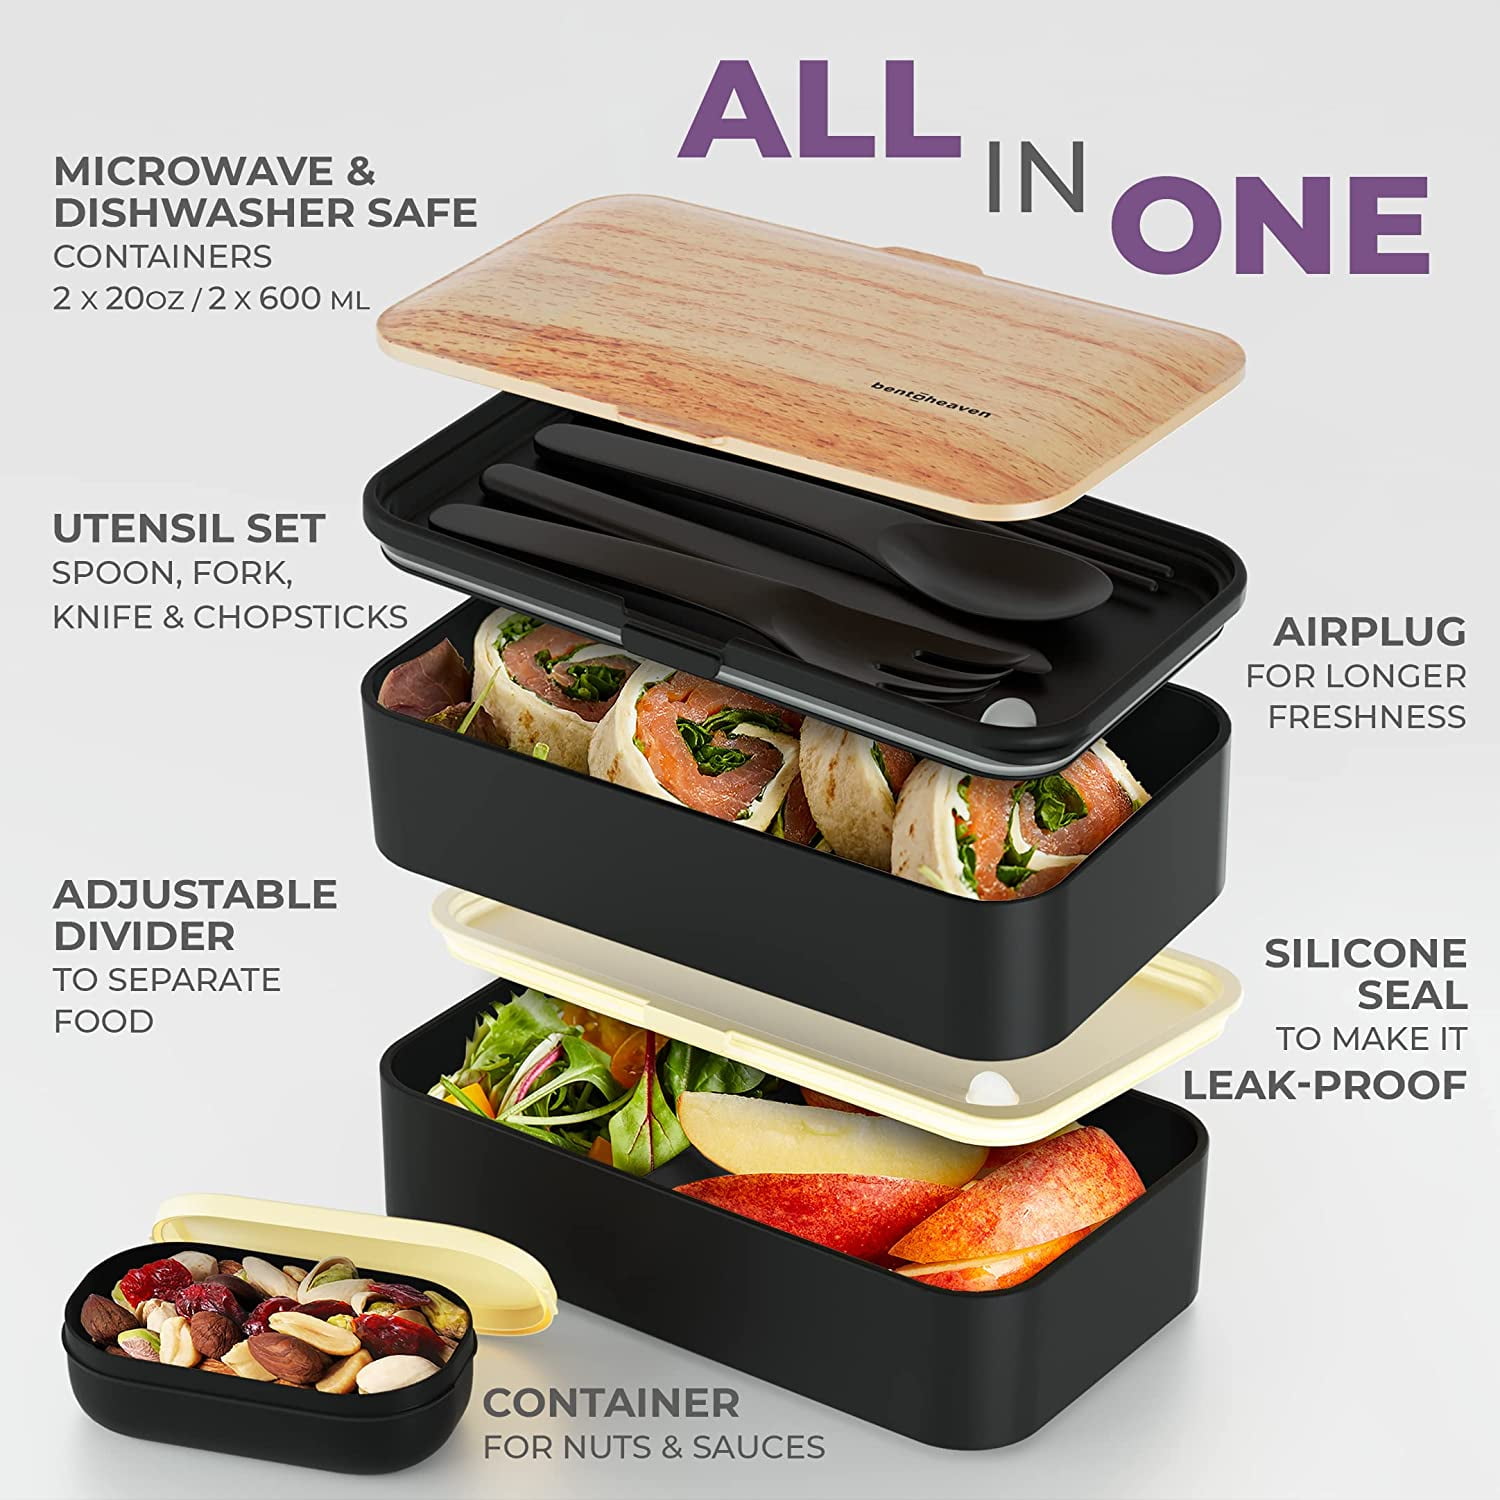 Hot Bento Self Heated Lunch Box with Primus Cutlery Set (HB-2-LINEN+PRIM-P738017-BUNDLE)